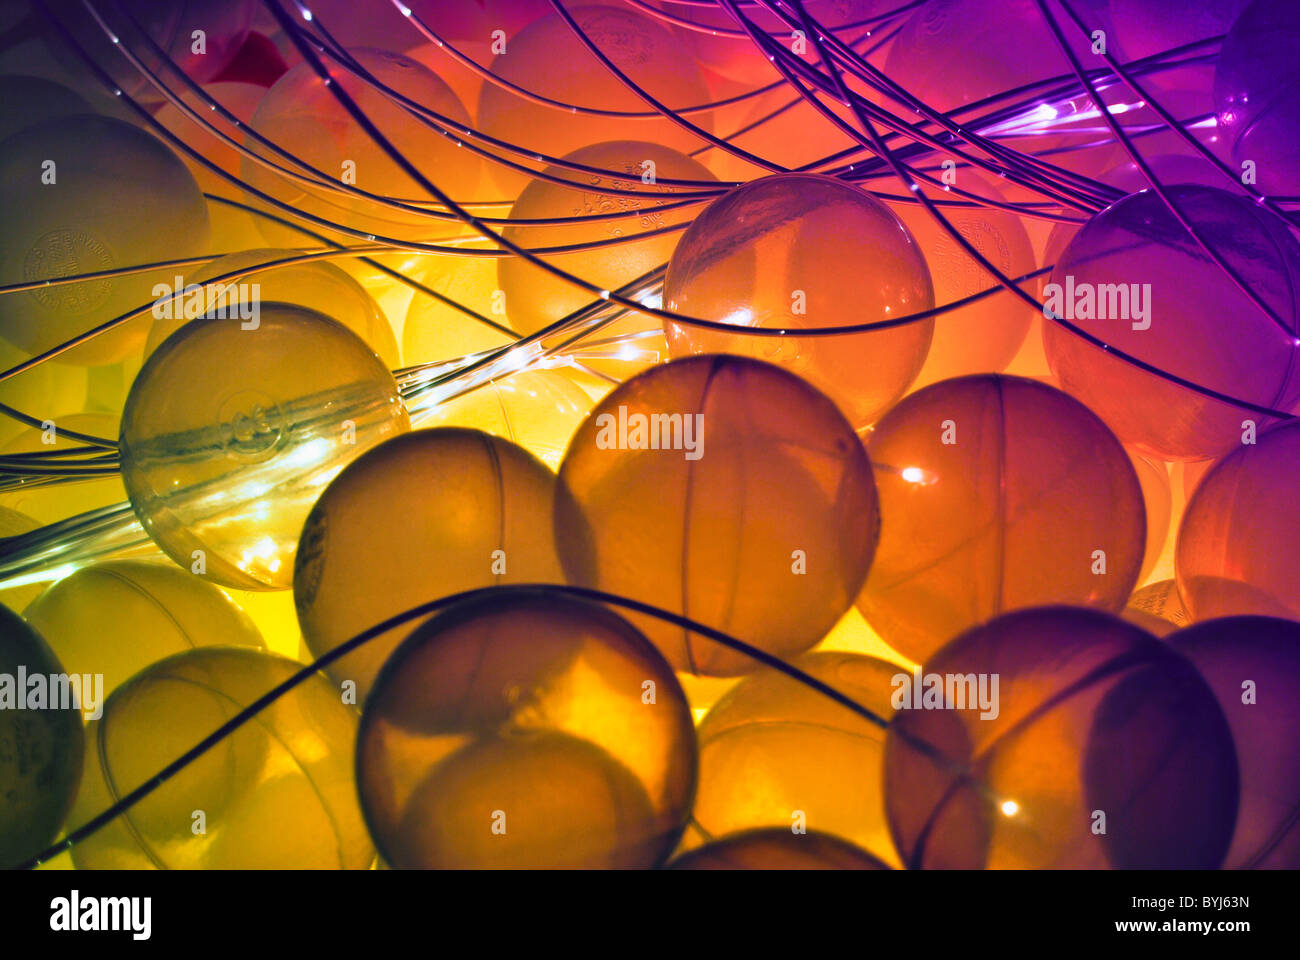 Ball pool with fiber optic cables in the light sensory room. Stock Photo